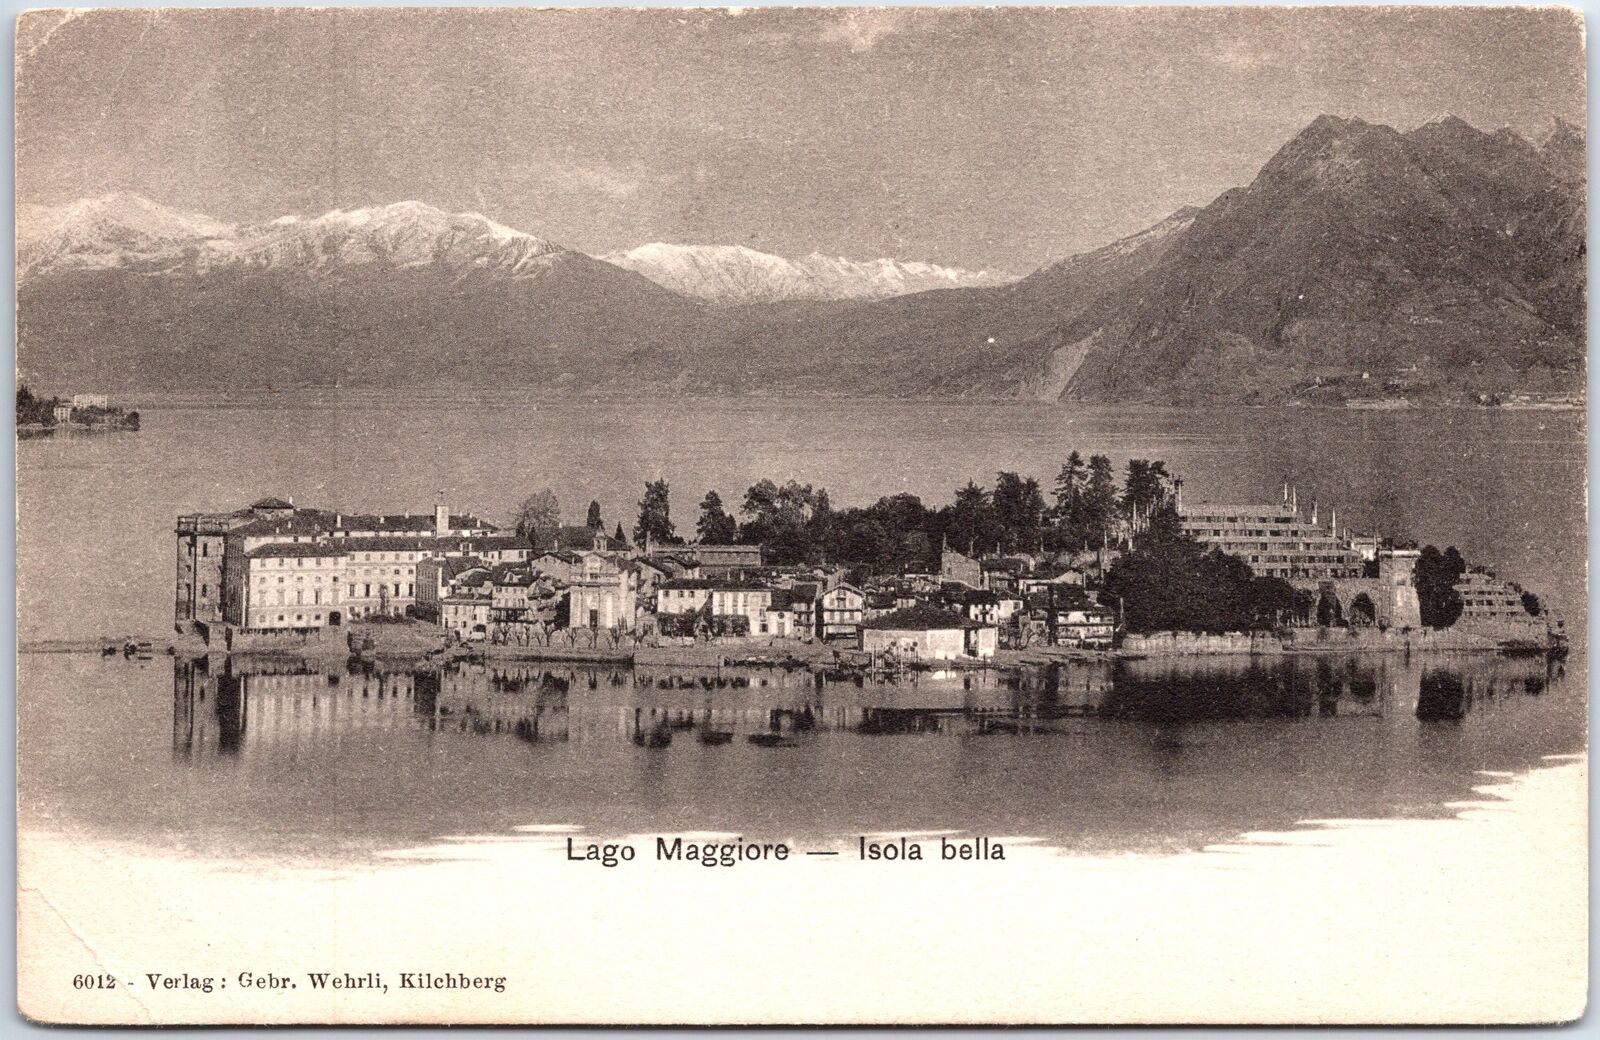 VINTAGE POSTCARD ISOLA BELLA ON LAKE MAGGIORE (ITALY) PUBLISHED c. 1900s